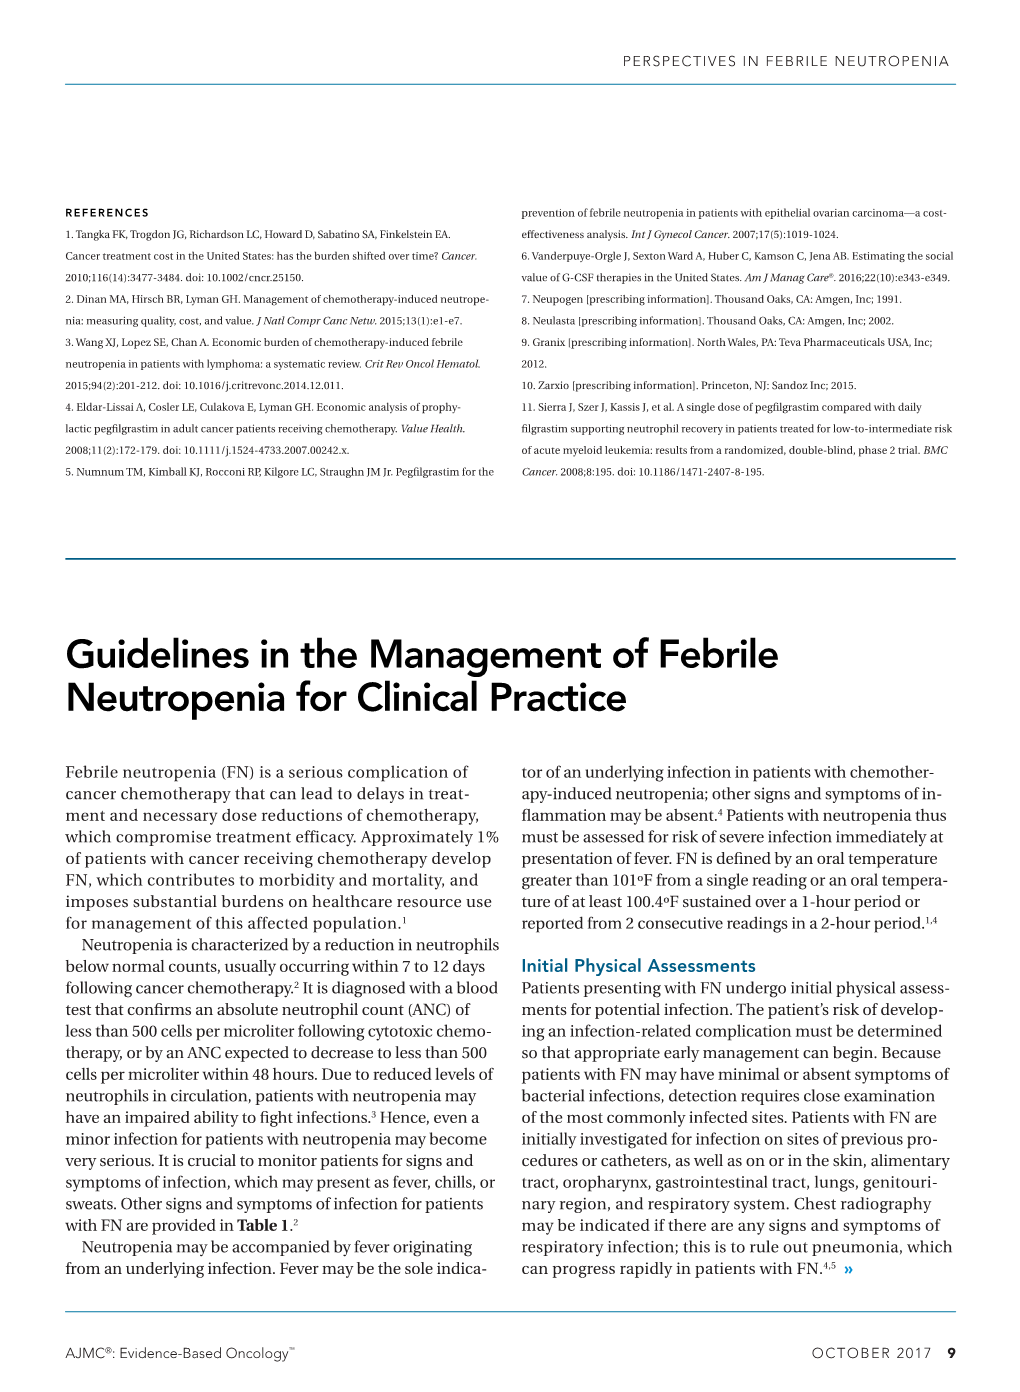 Guidelines in the Management of Febrile Neutropenia for Clinical Practice